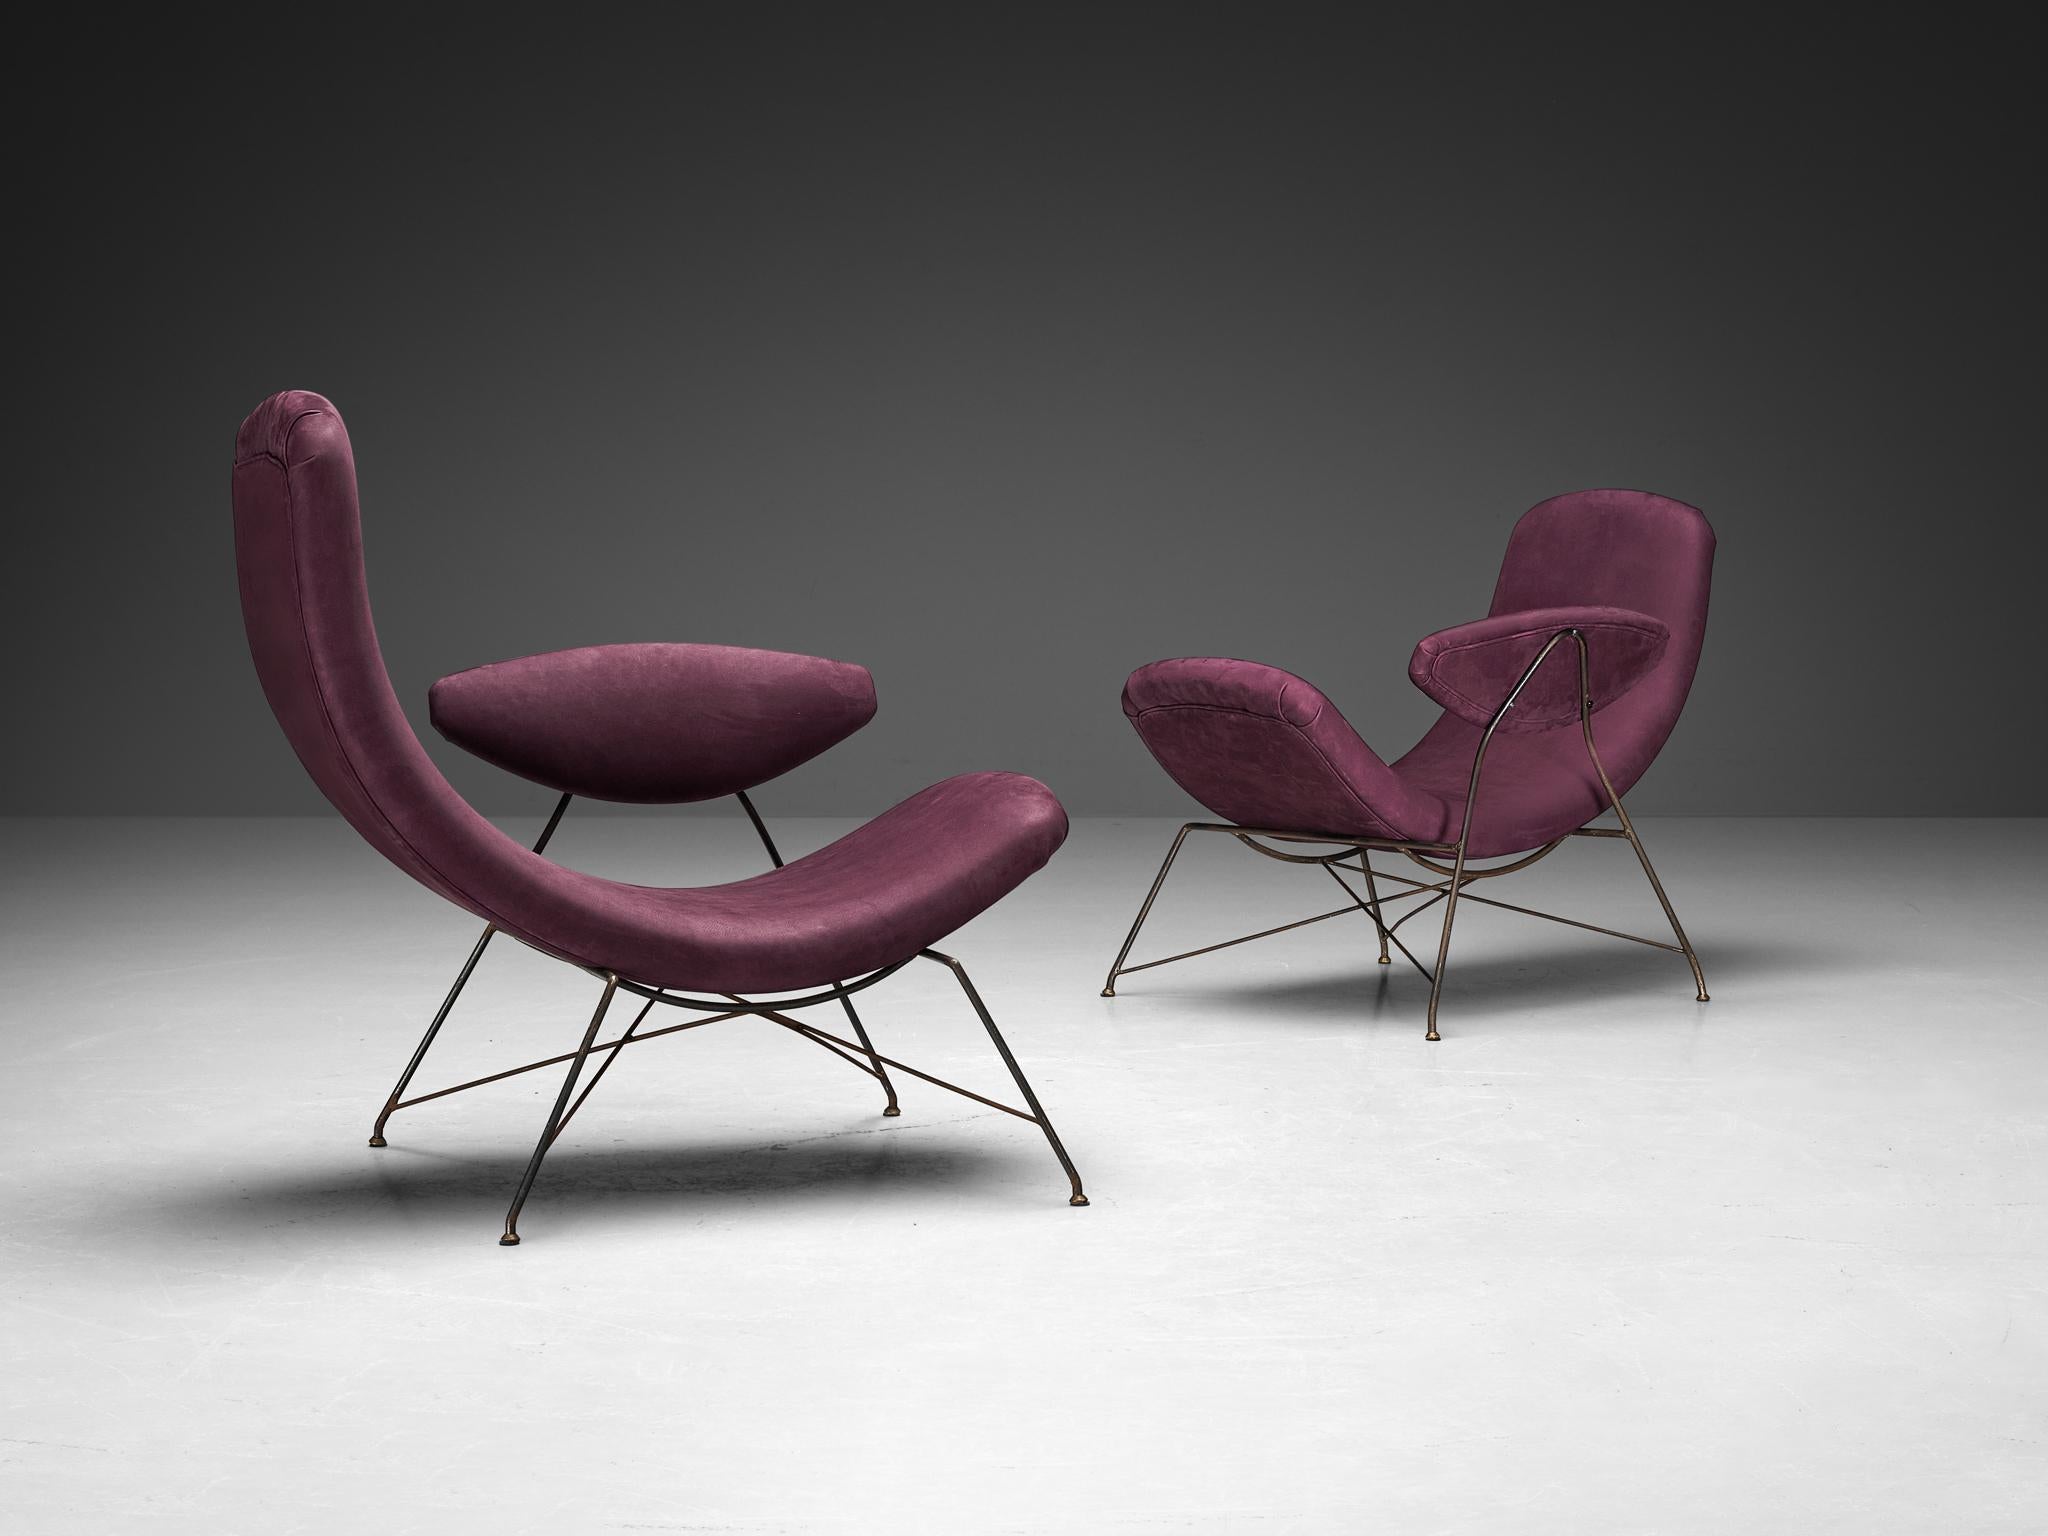 Martin Eisler and Carlo Hauner, 'Reversible' lounge chairs, nubuck leather Long Beach - Grape Wine by Montebello, lacquered iron, brass, Brazil, 1955

The early edition Reversible lounge chairs, designed by Brazilian design masters Martin Eisler and